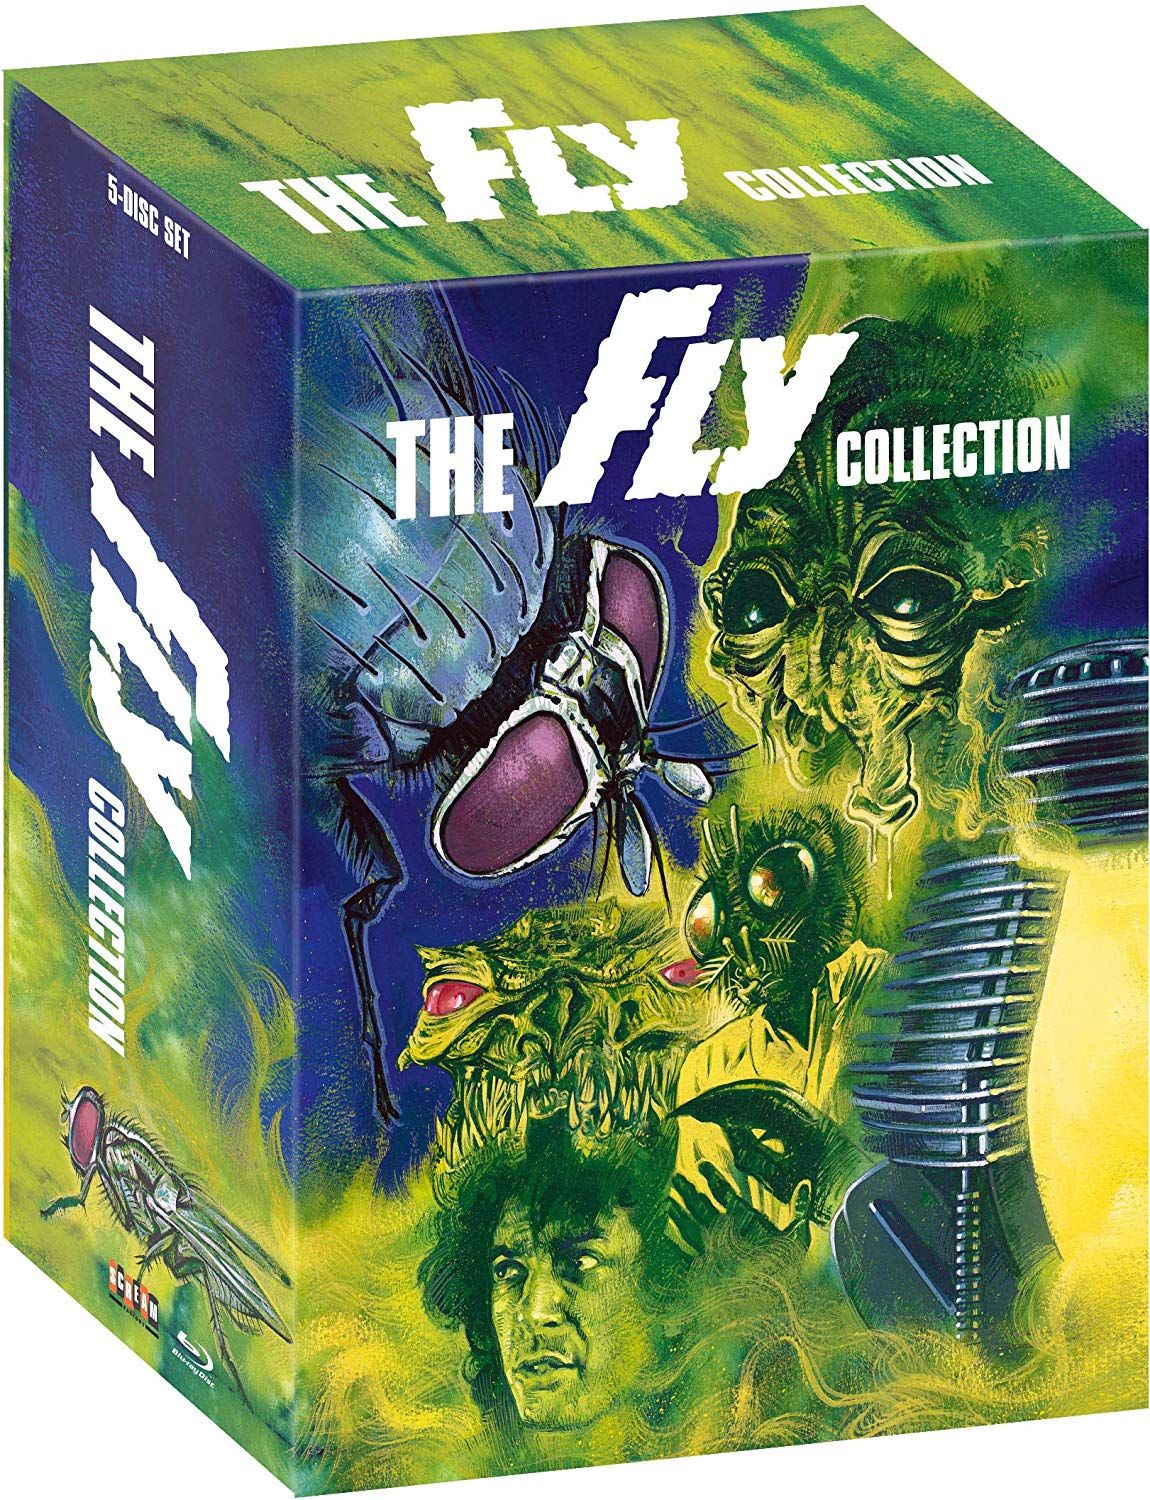 The Fly Collection Scream Factory